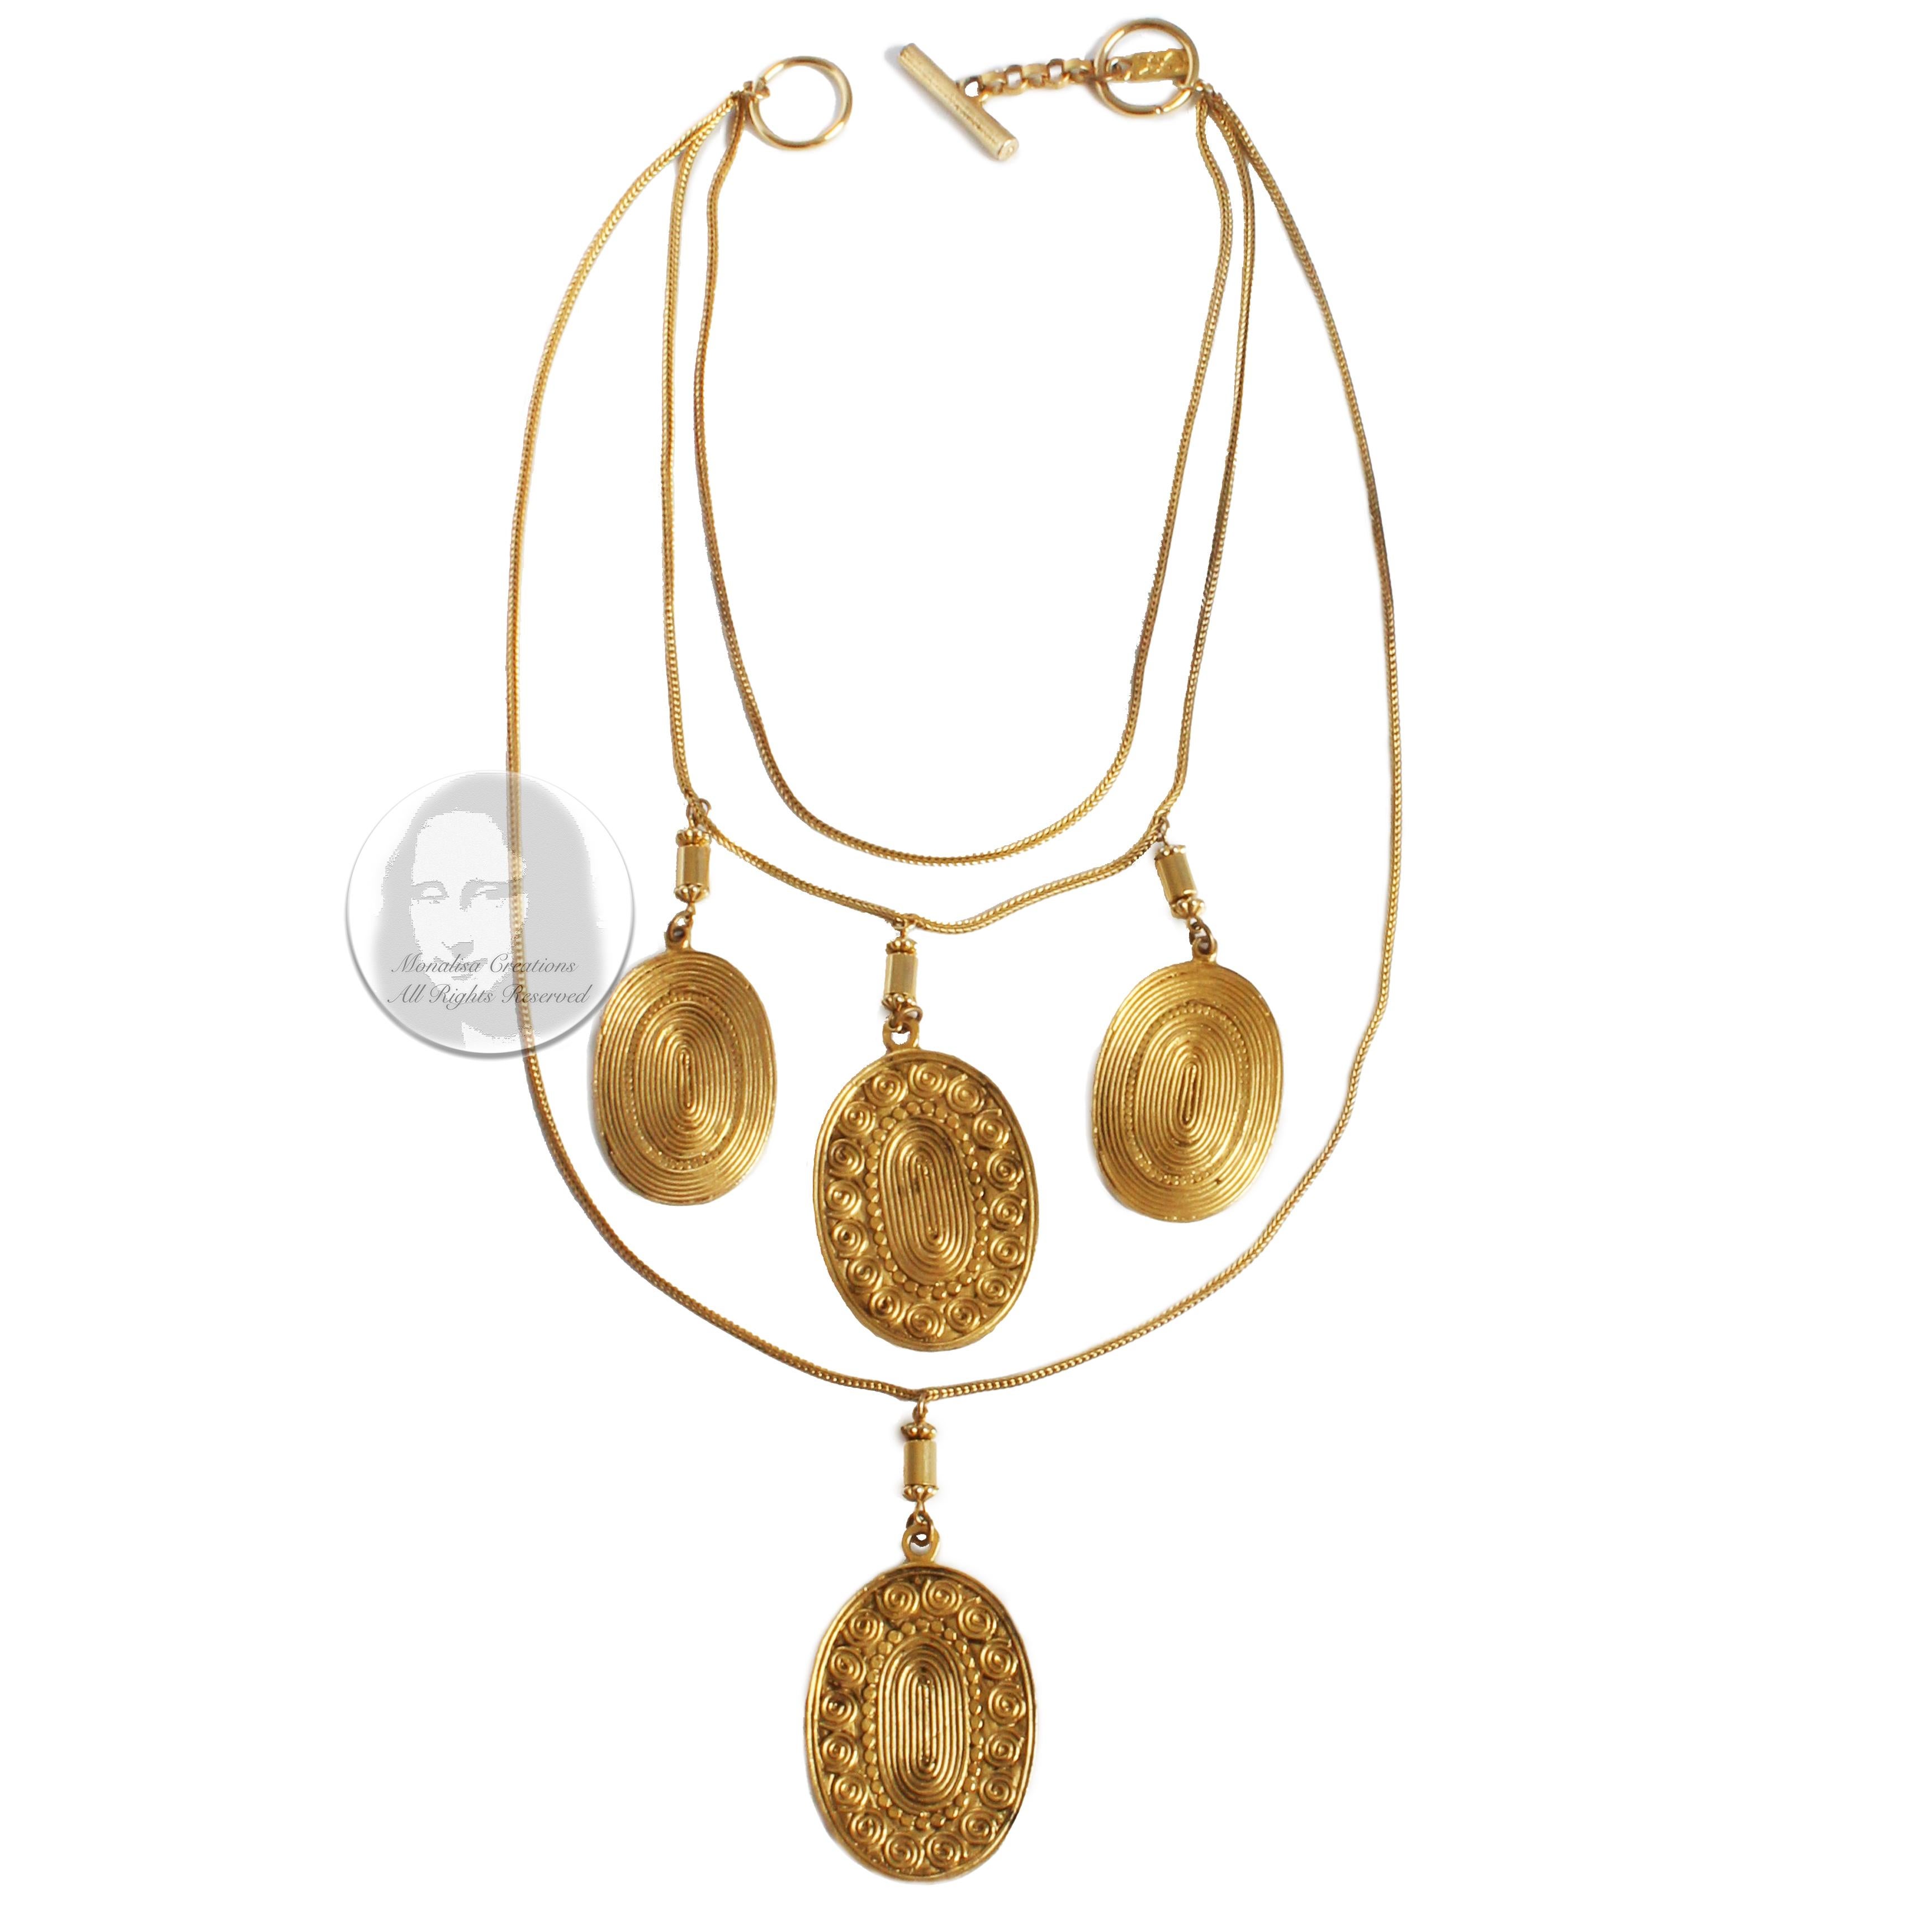 Vintage coin or medallion necklace, made by Yves Saint Laurent, most likely in the late 70s. Made from gold metal, it features three chain strands with a total of four dangling medallions.  Each Etruscan-style medallion features a swirl pattern on